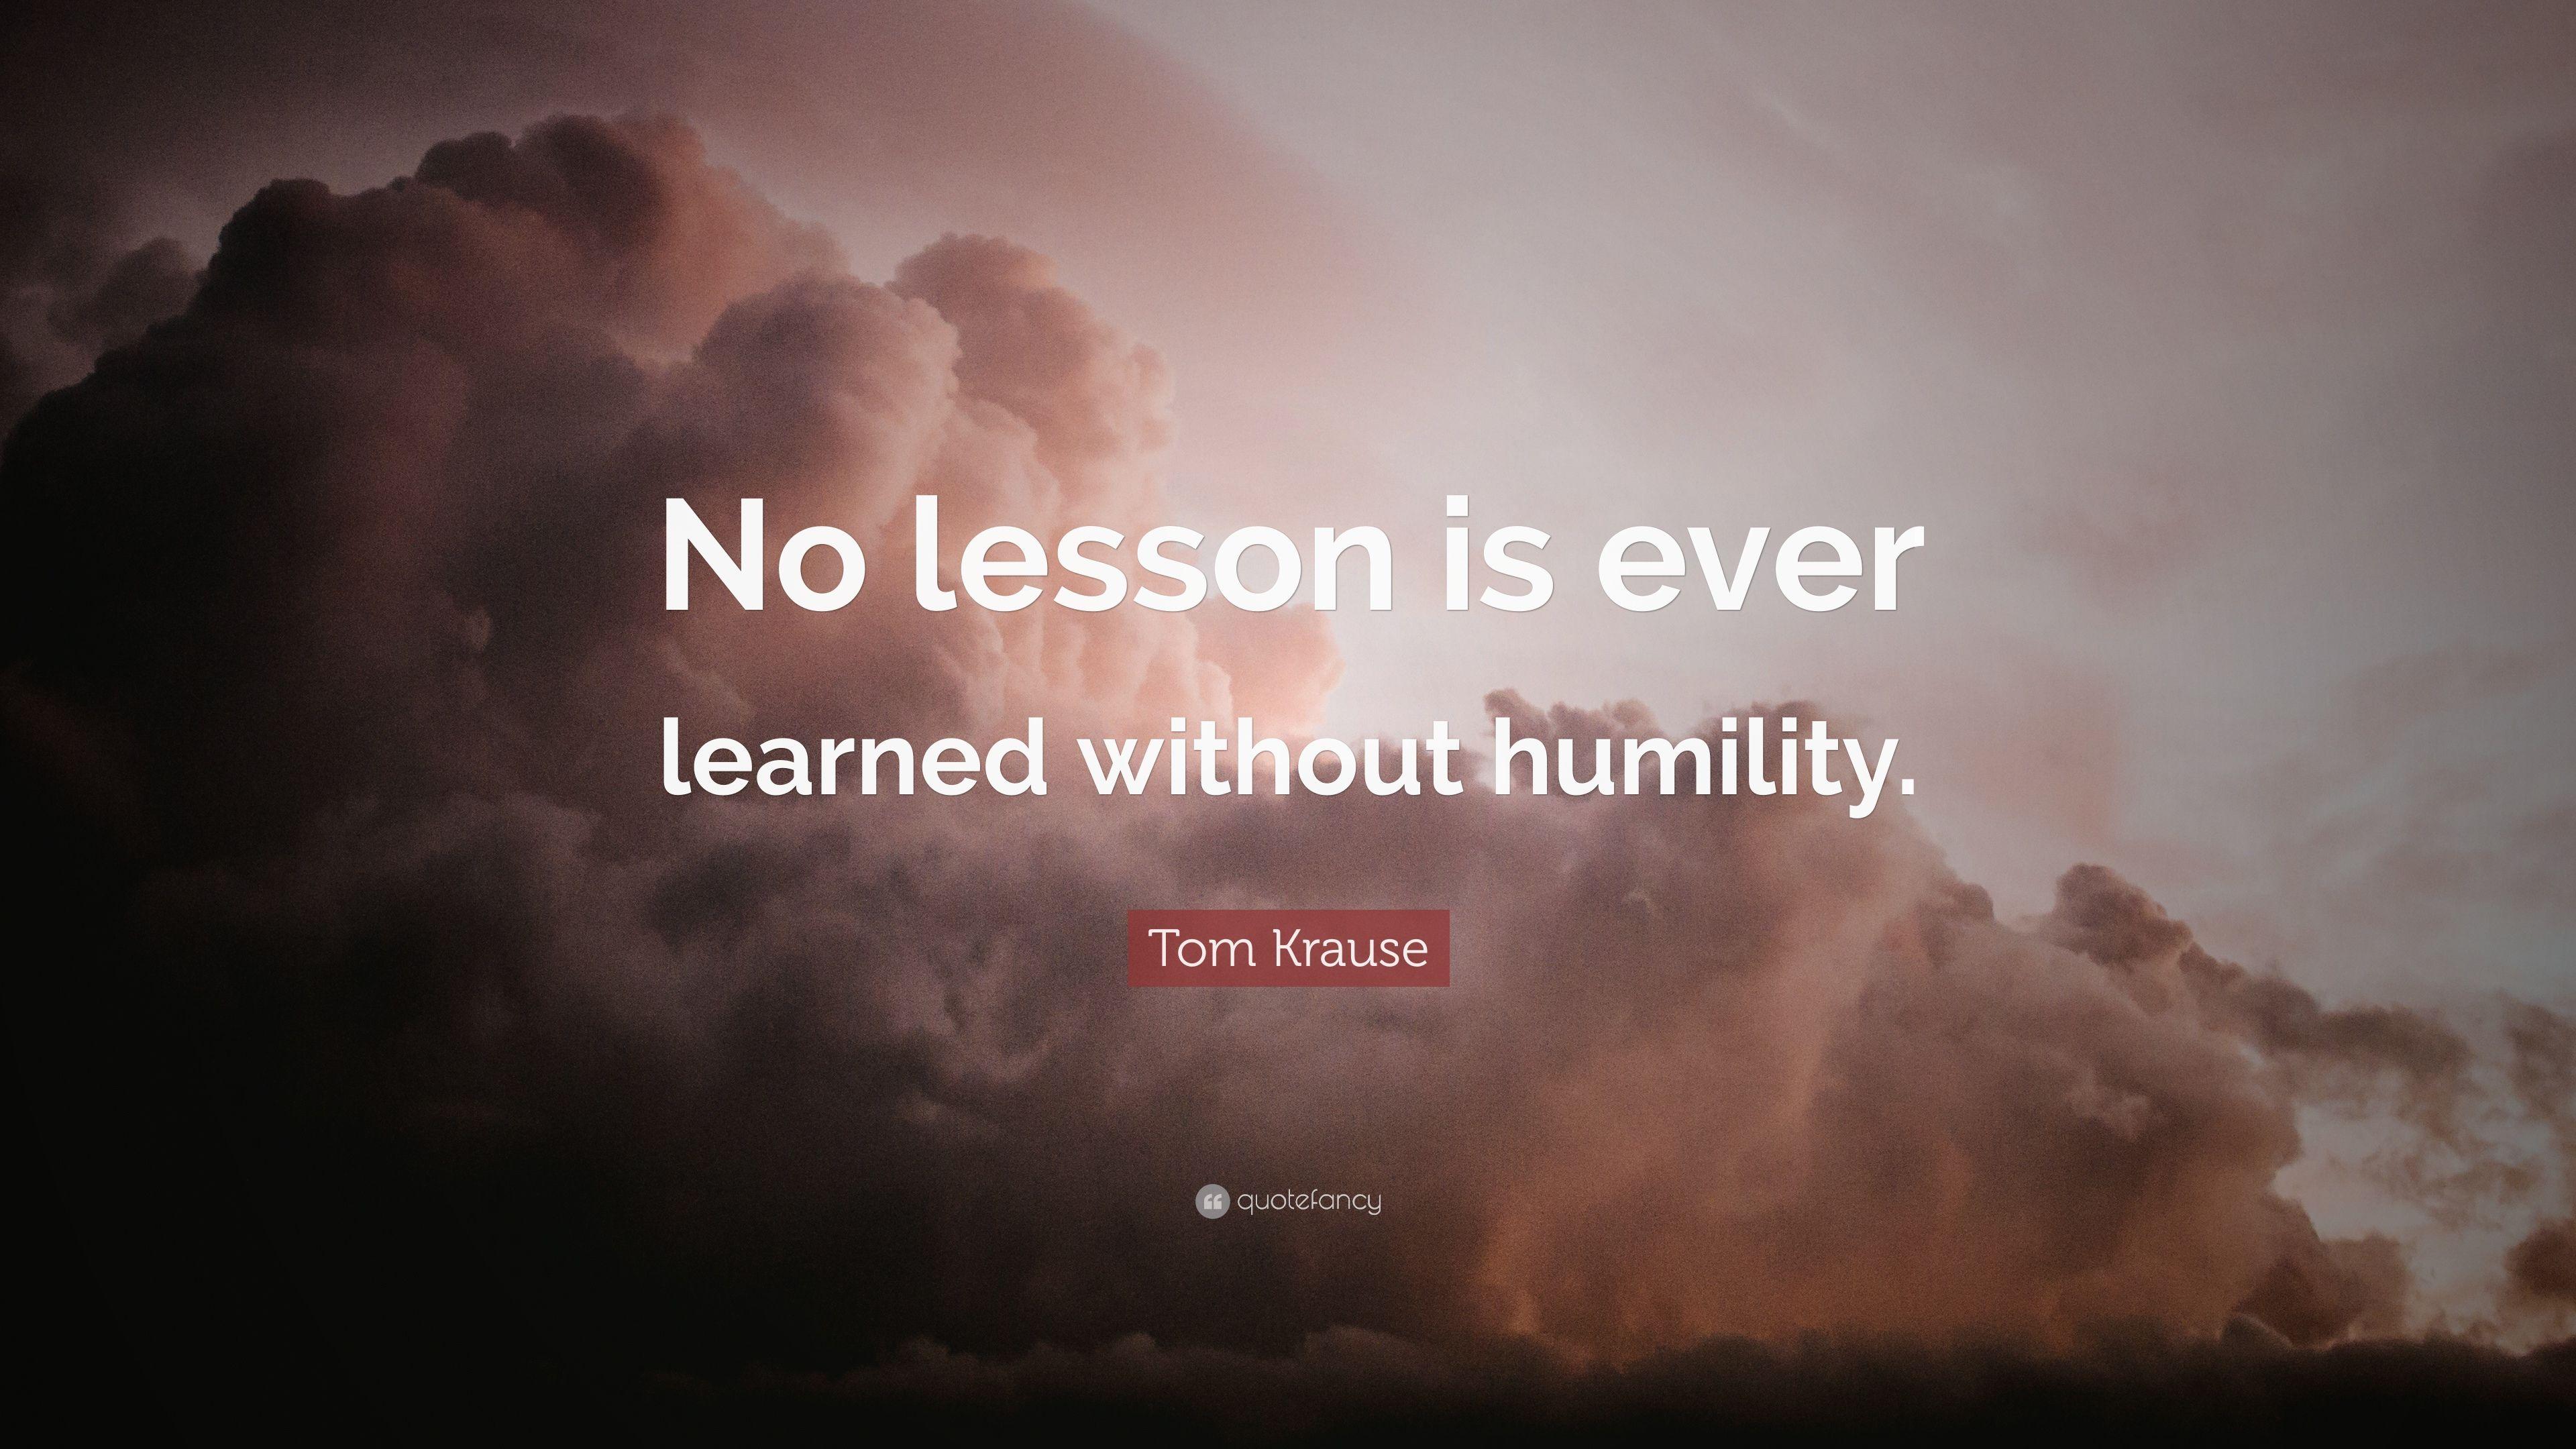 Tom Krause Quote: “No lesson is ever learned without humility.” 15